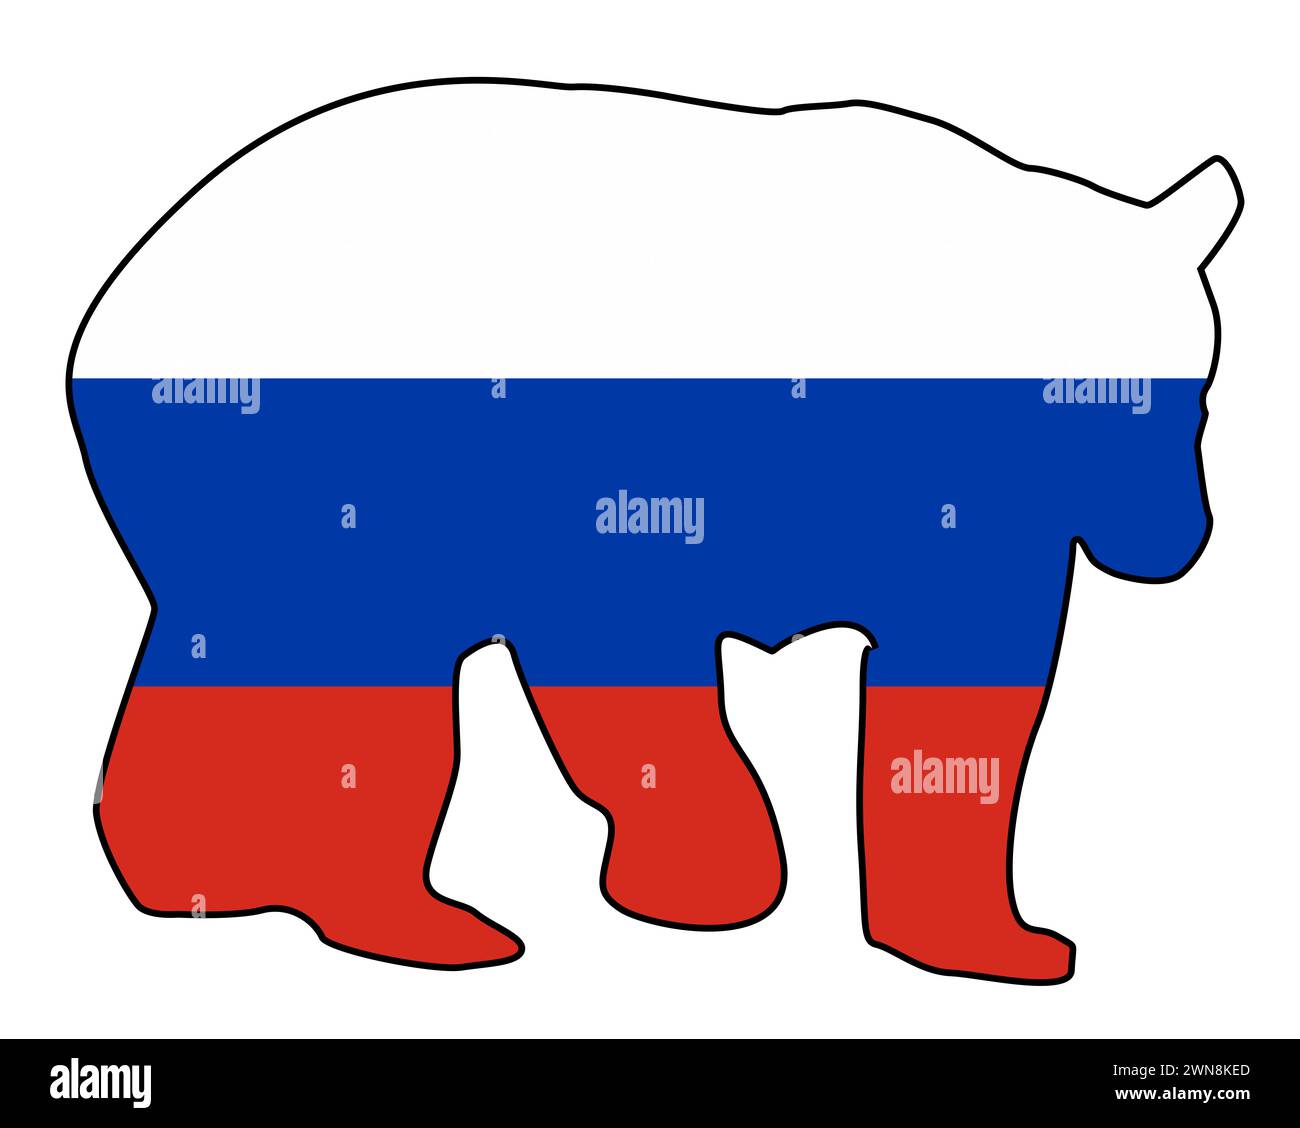 Silhouette of a large Russian bear on the newer Rusian flag of red white and blue stripes Stock Photo